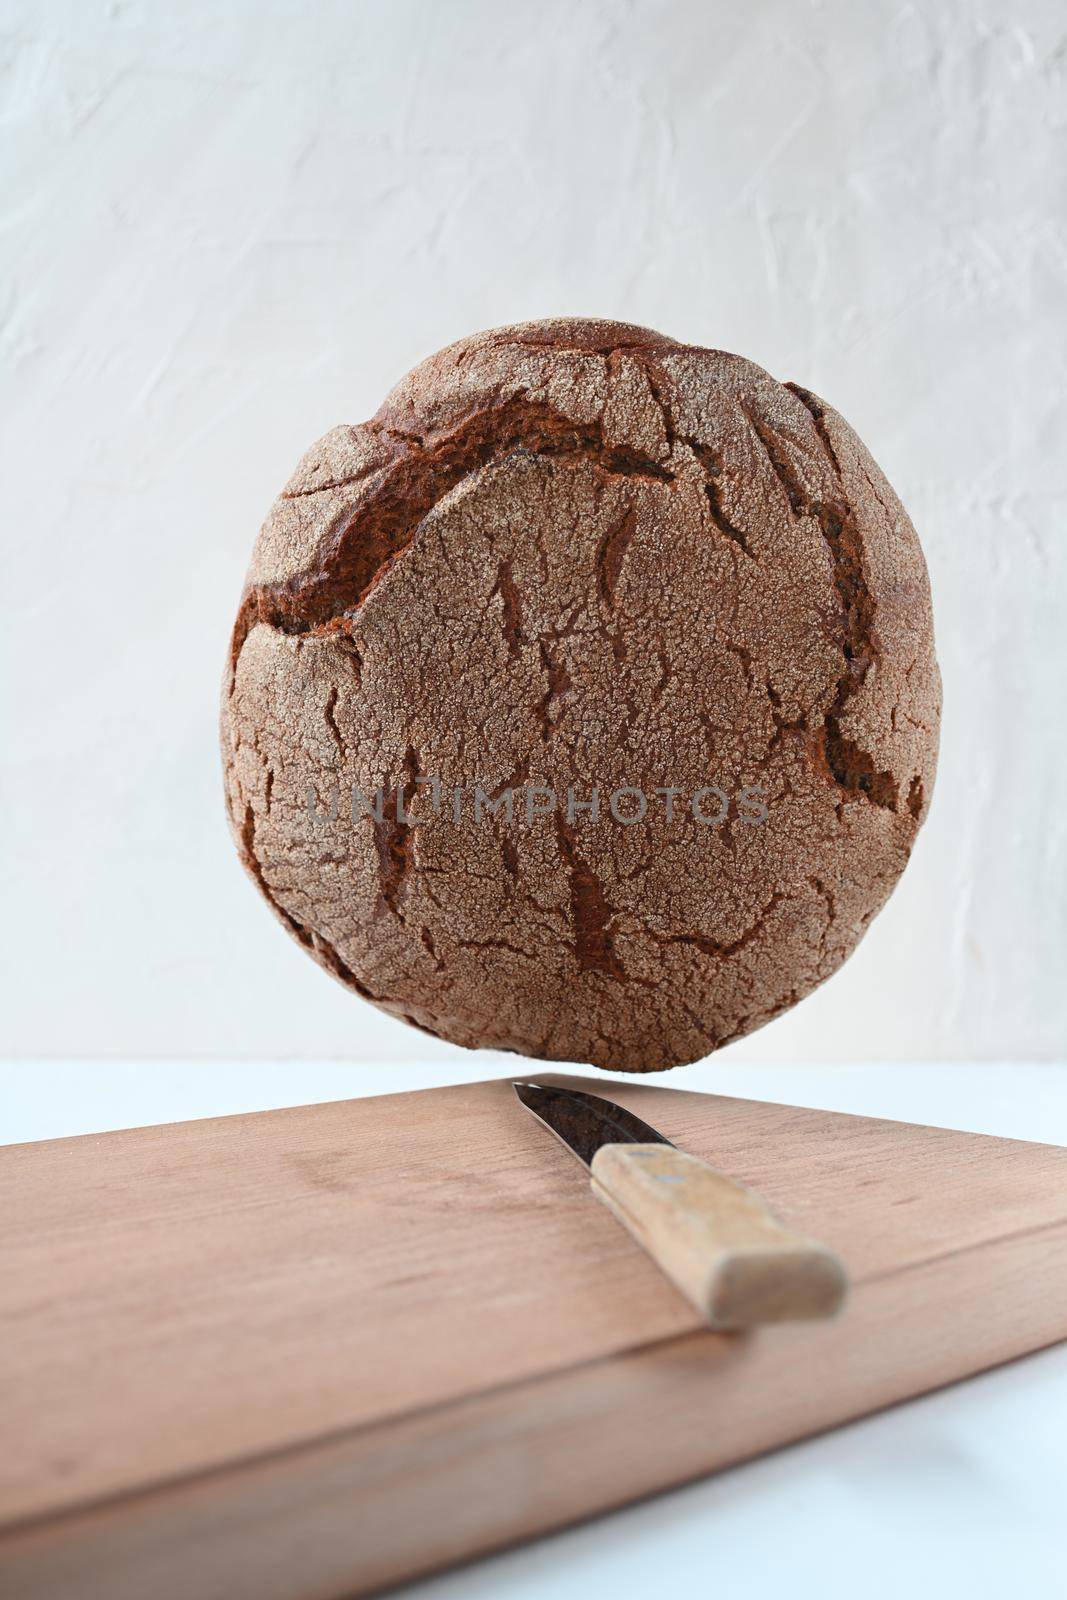 black bread on wooden board and white background. levitation.